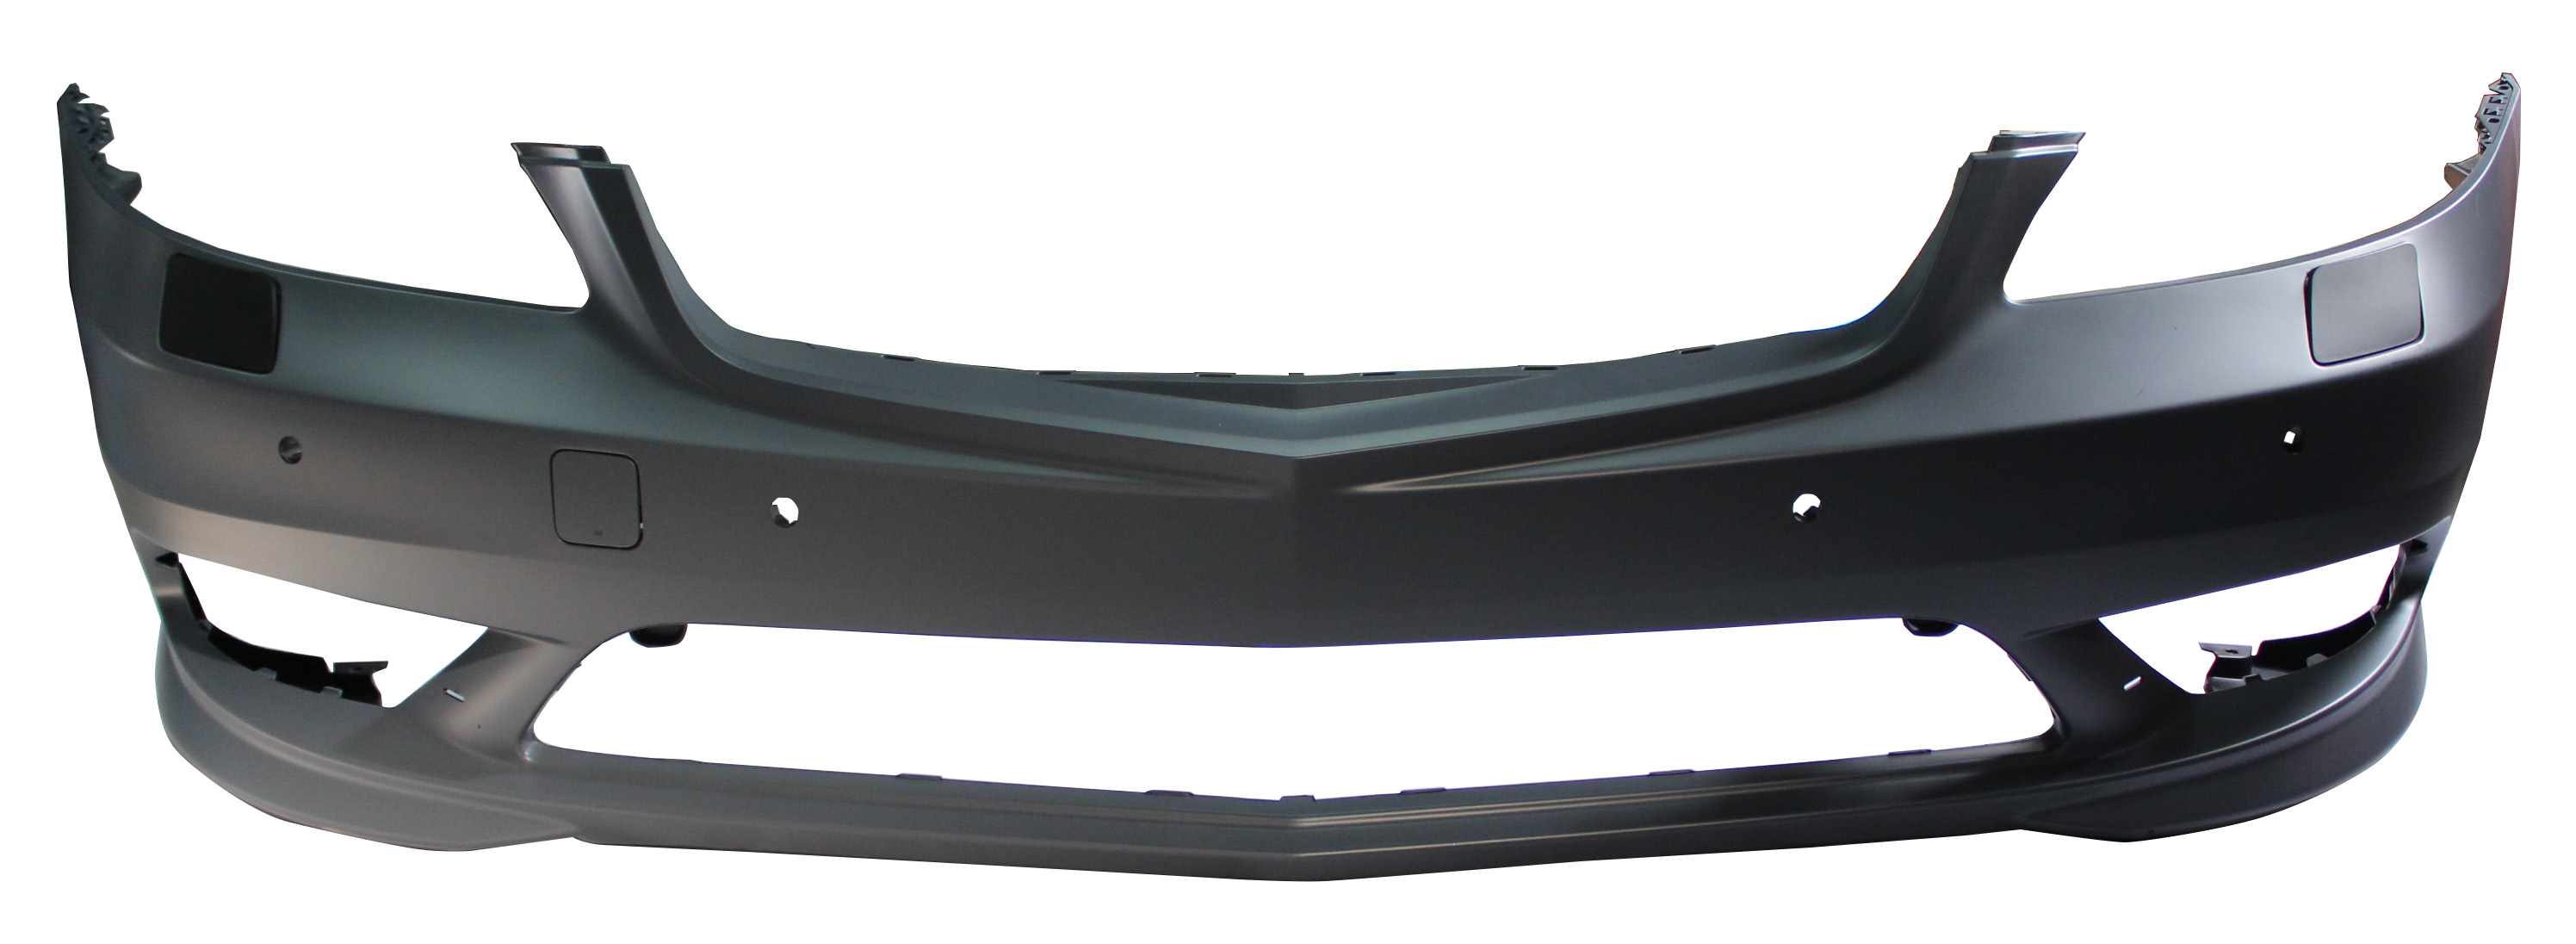 Aftermarket BUMPER COVERS for MERCEDES-BENZ - S550, S550,12-13,Front bumper cover